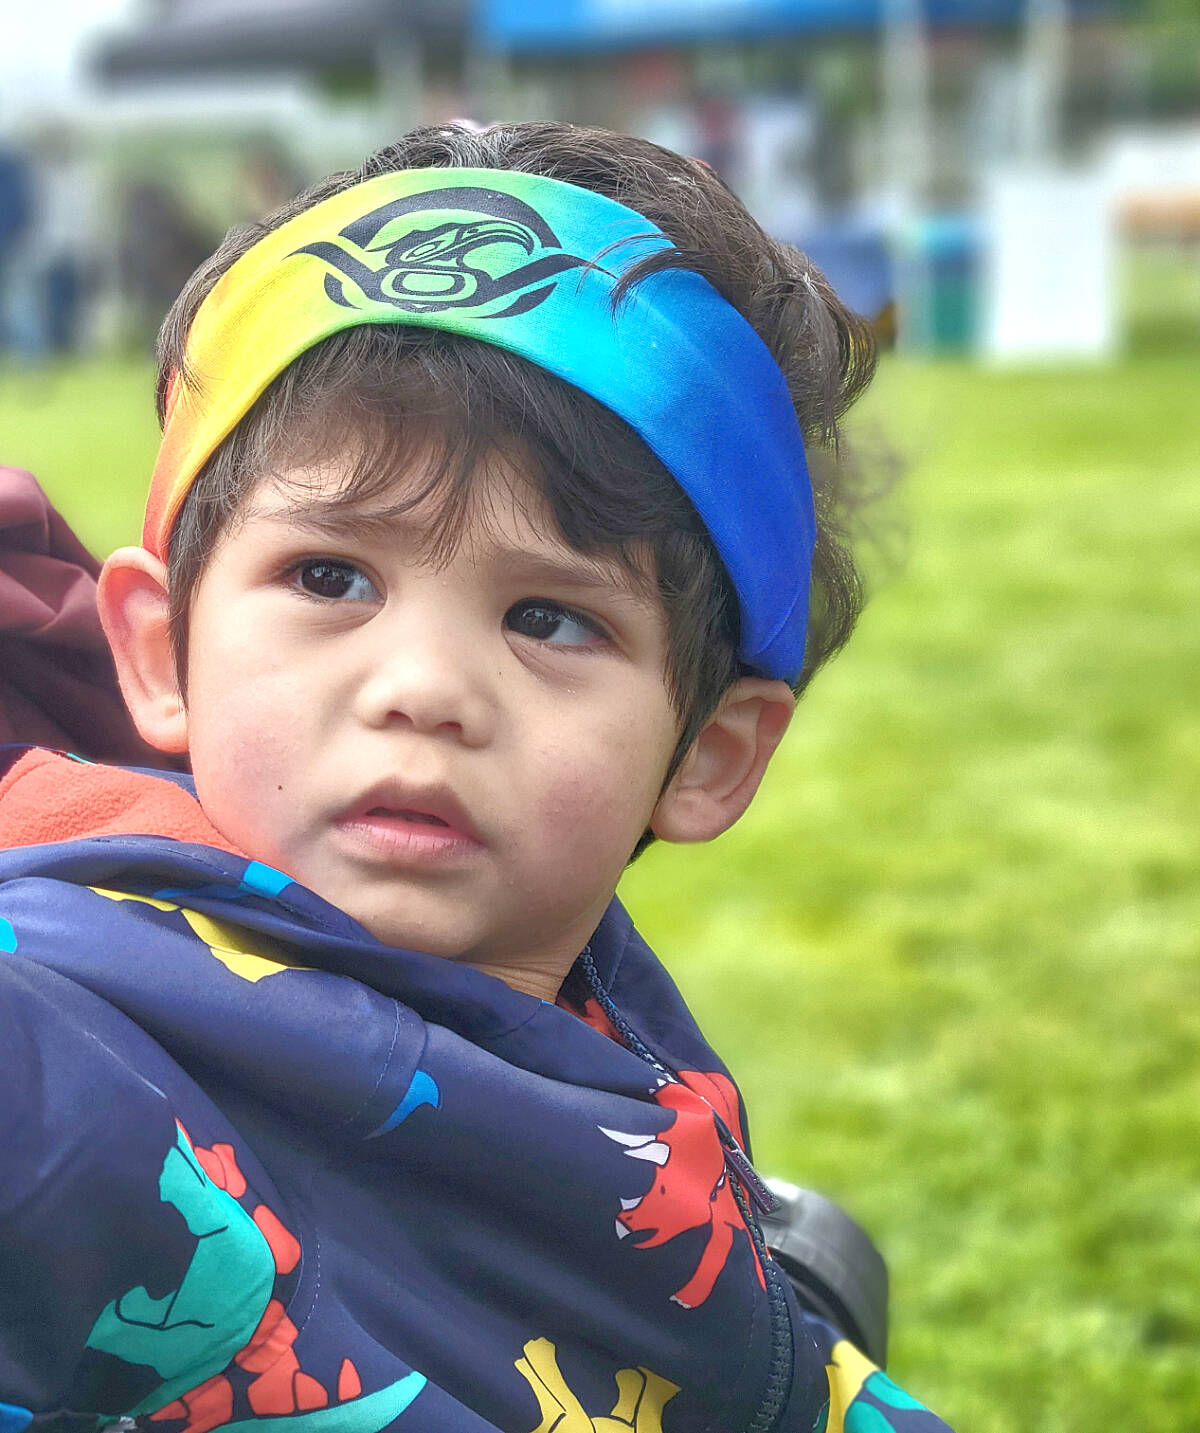 Dominic Matos, 2 and a half, from Aldergrove, was among 400 visitors to the celebration of National Indigenous Peoples Day in Aldergroves Philip Jackman Park on Saturday, June 18. (Dan Ferguson/Langley Advance Times)